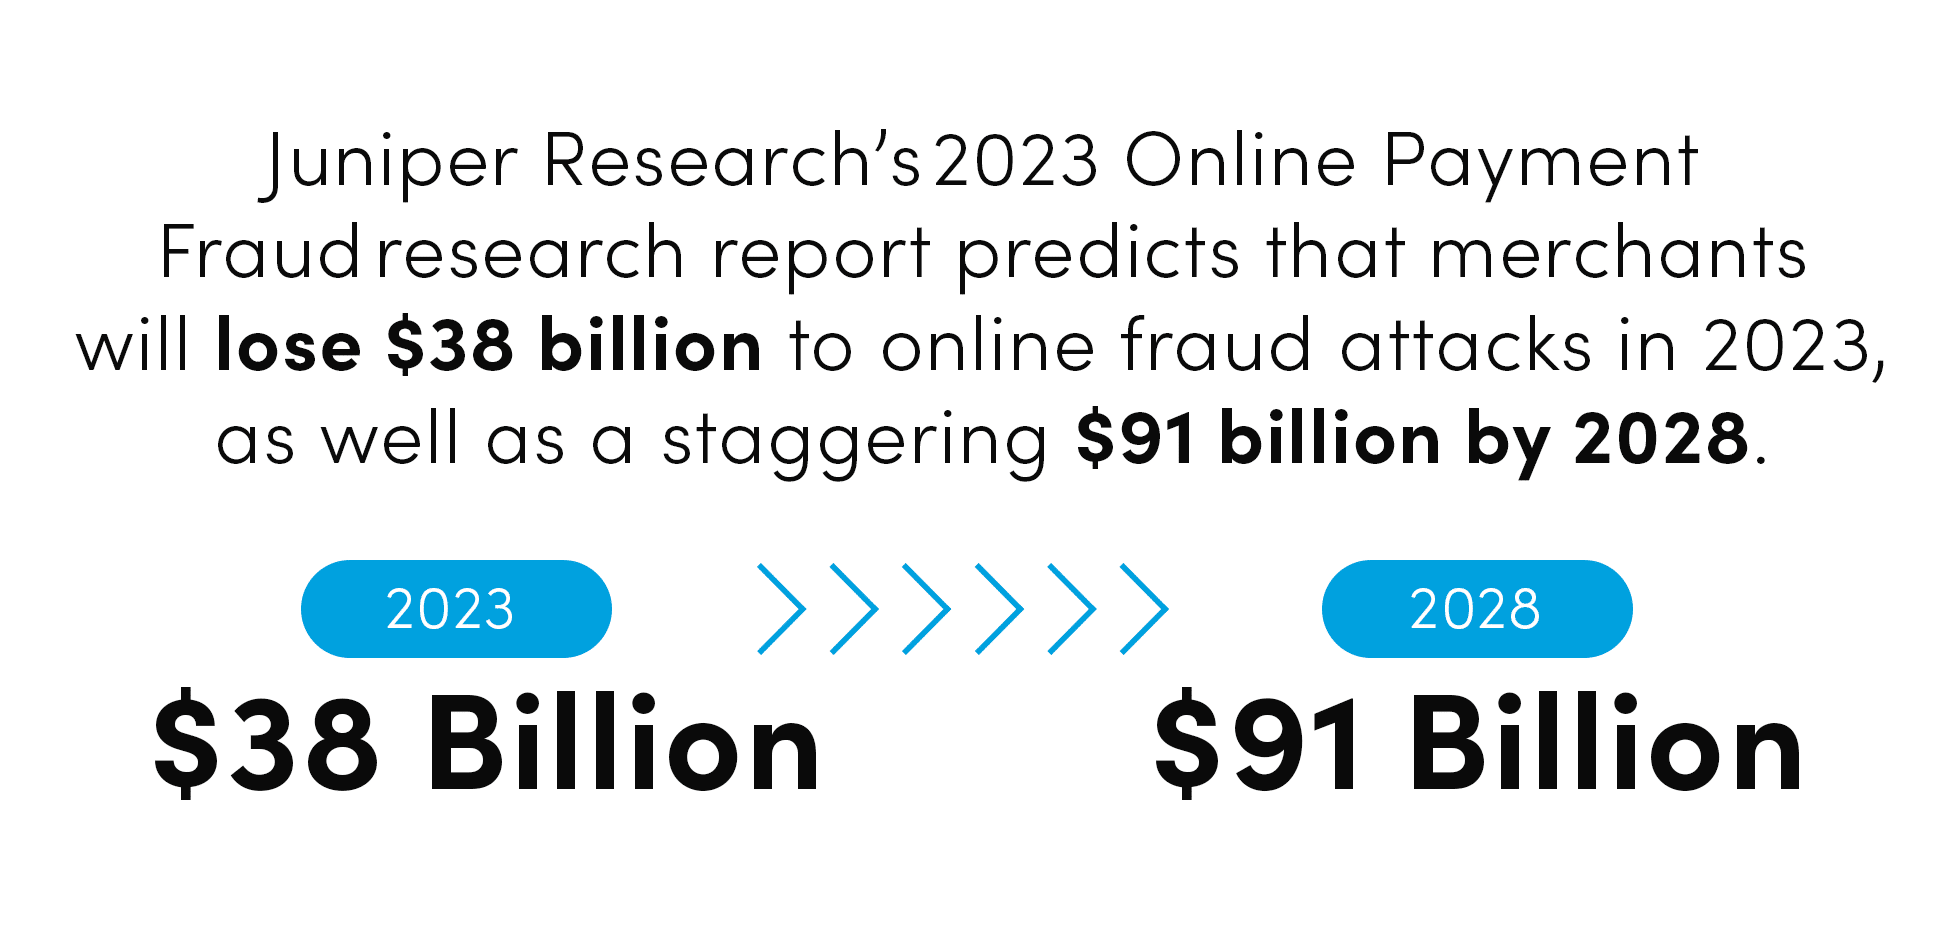 research statistic predicts that merchants will lose $38 billion to online fraud attacks in 2023, as well as a staggering $91 billion by 2028. 